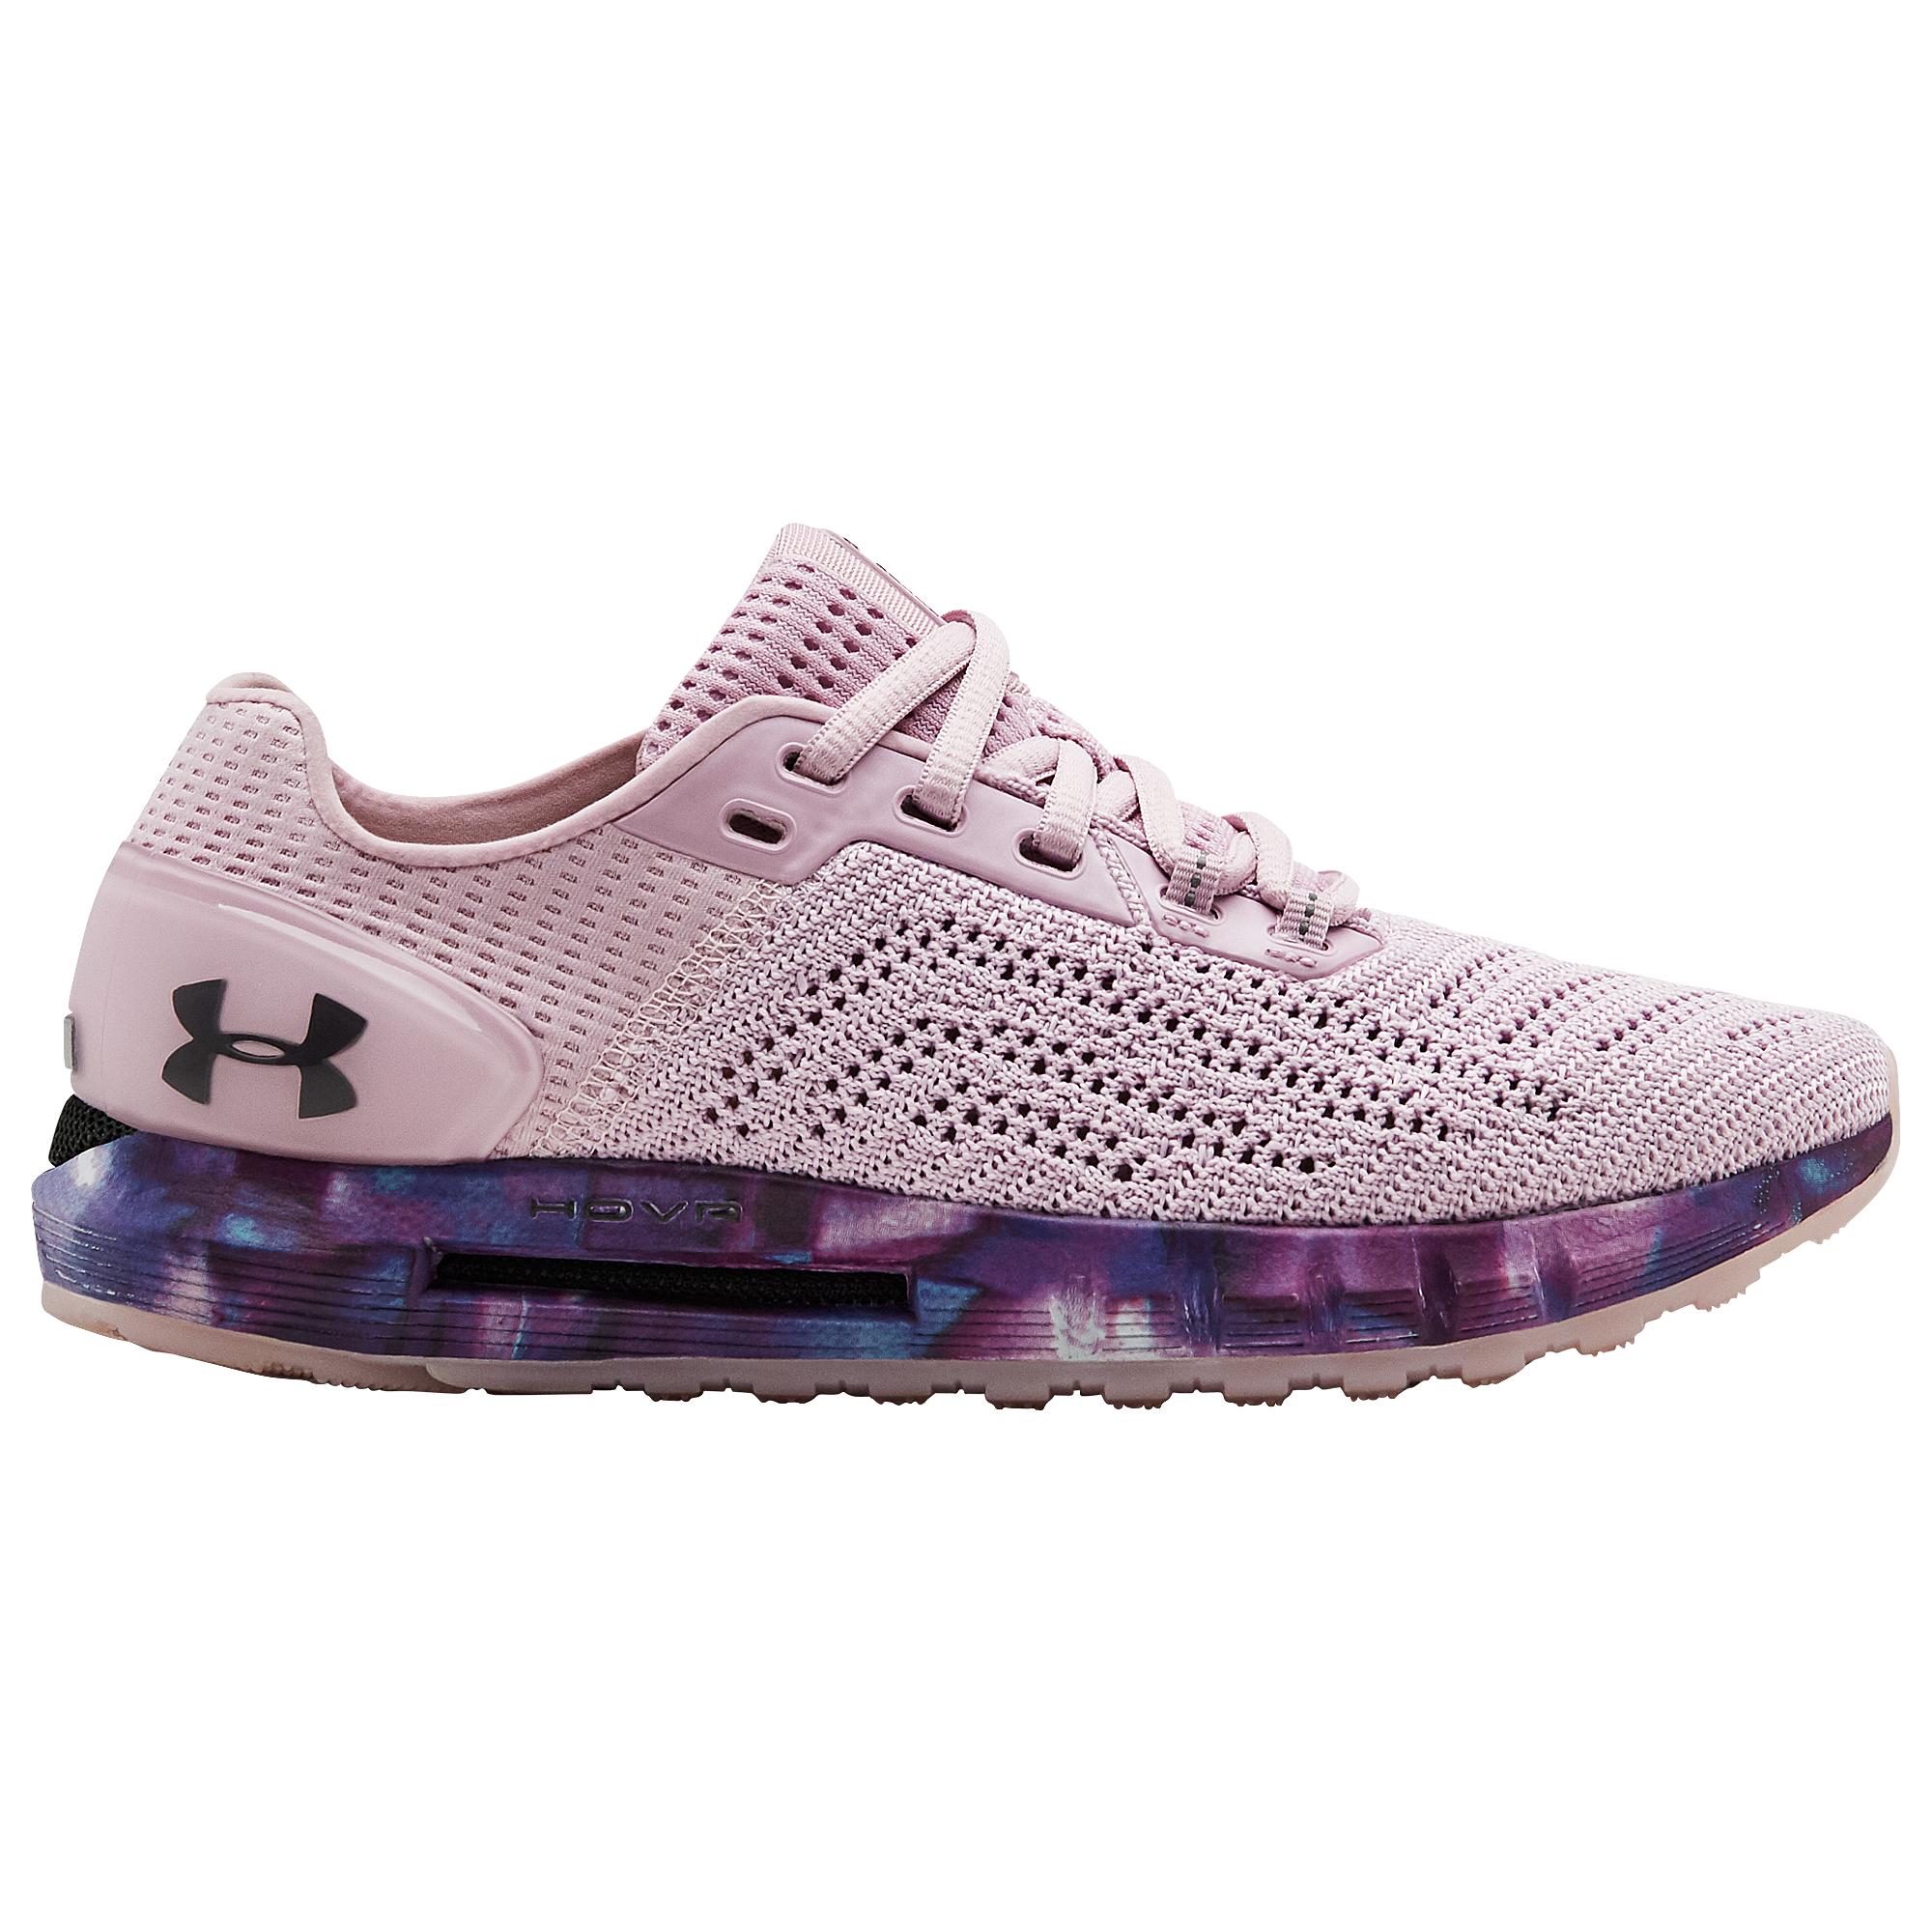 under armour hovr sonic 2 women's